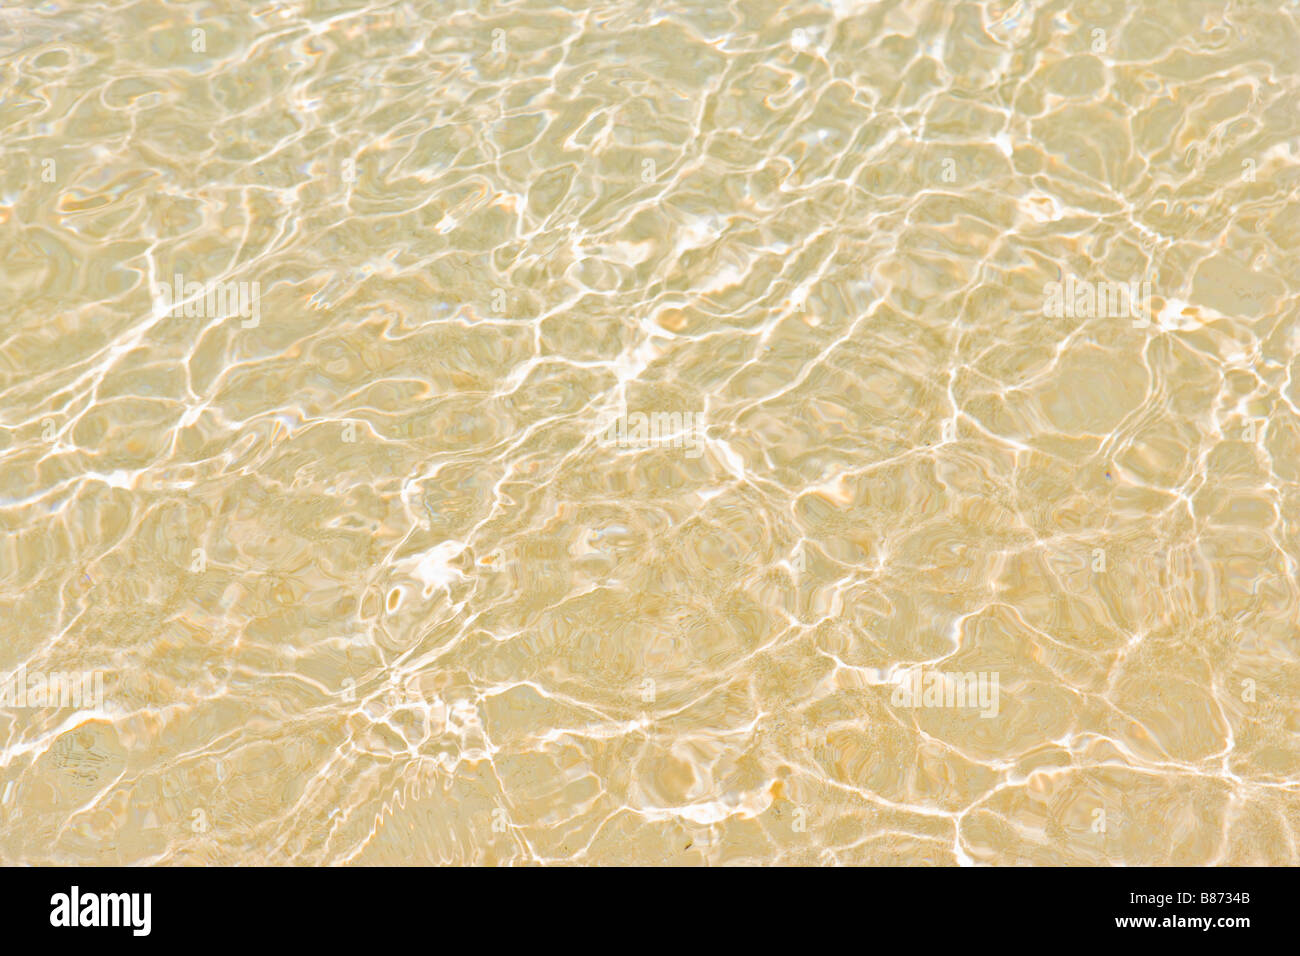 Reflections refractions in water on a sandy beach Stock Photo